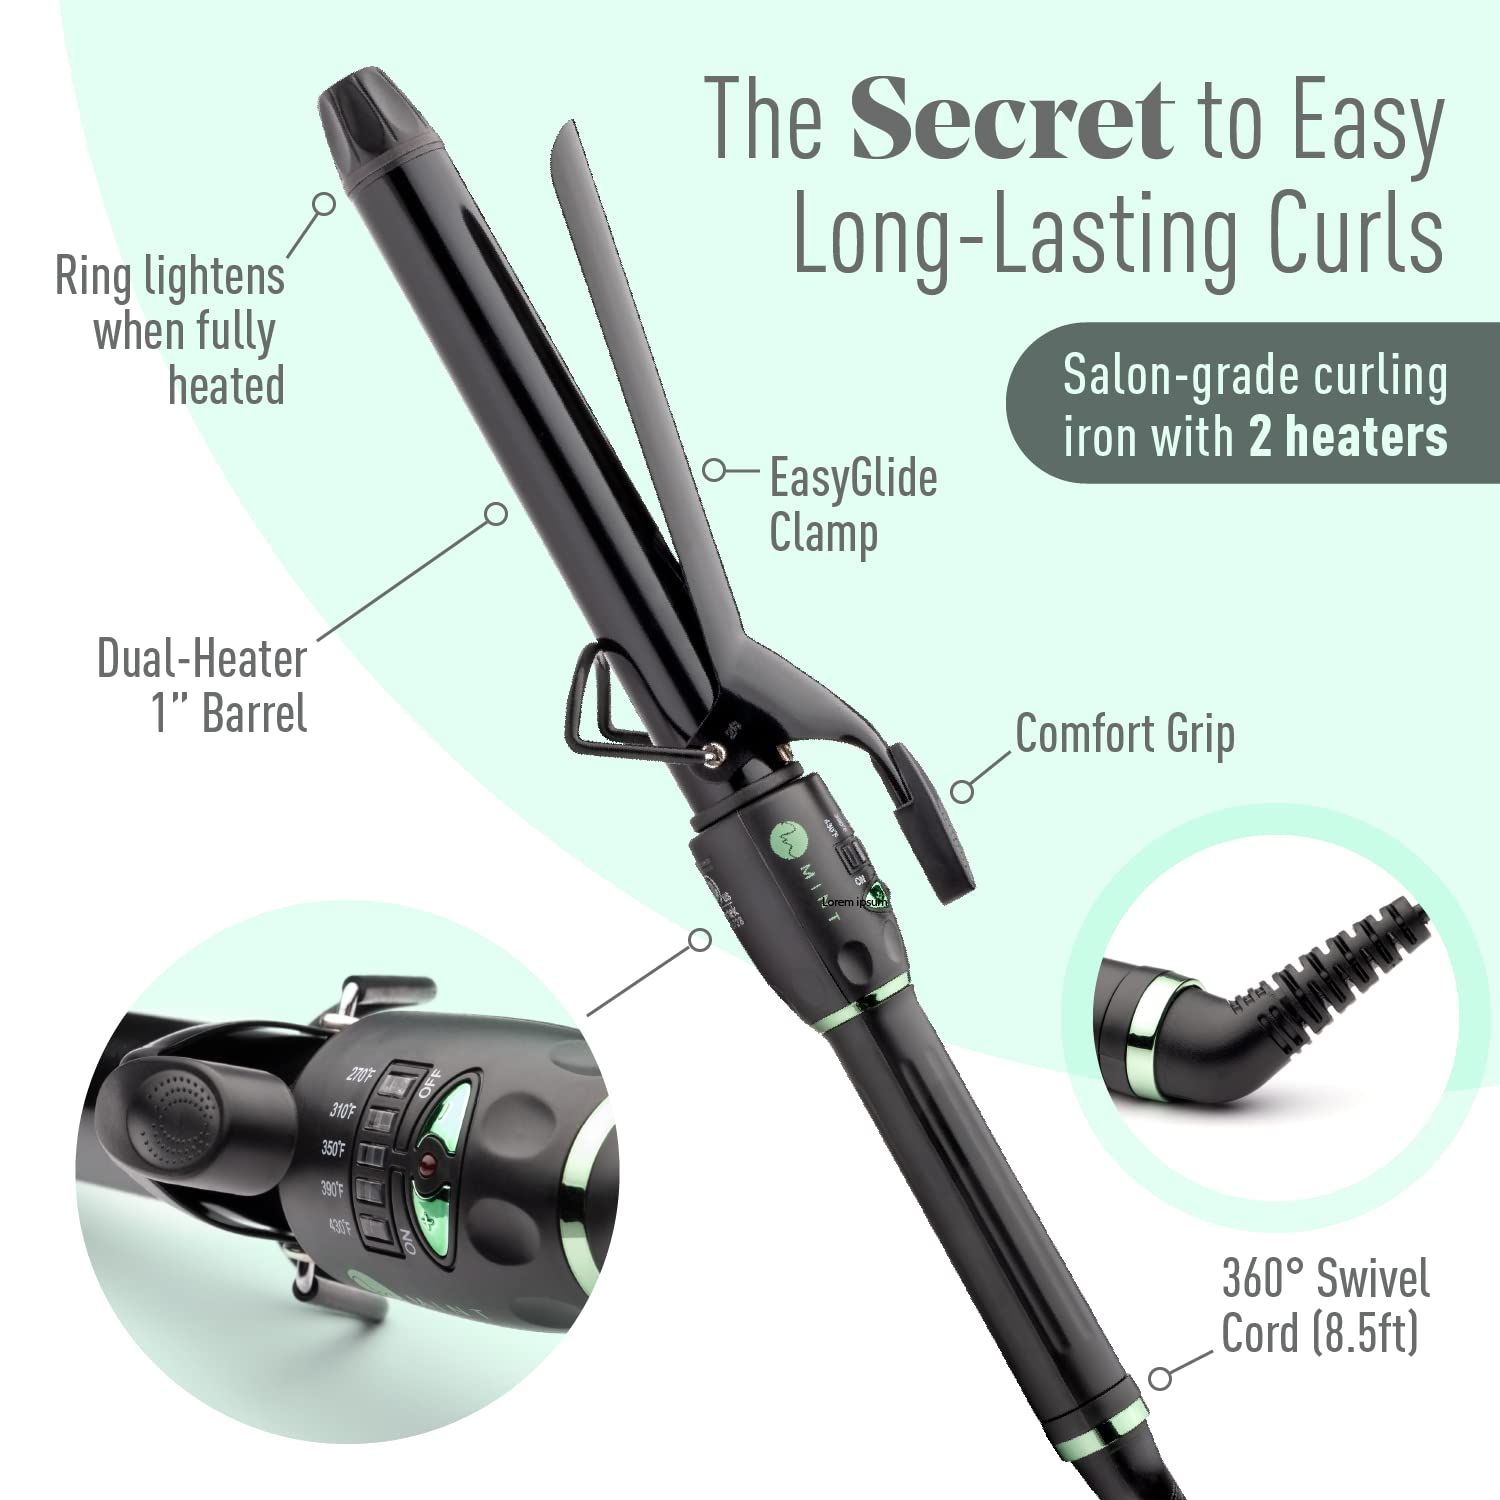 Curling Iron 1 Inch Easy Long-Lasting Curls - Professional Hair Curler/Waver for Beach Waves, Curls  | Amazon (CA)